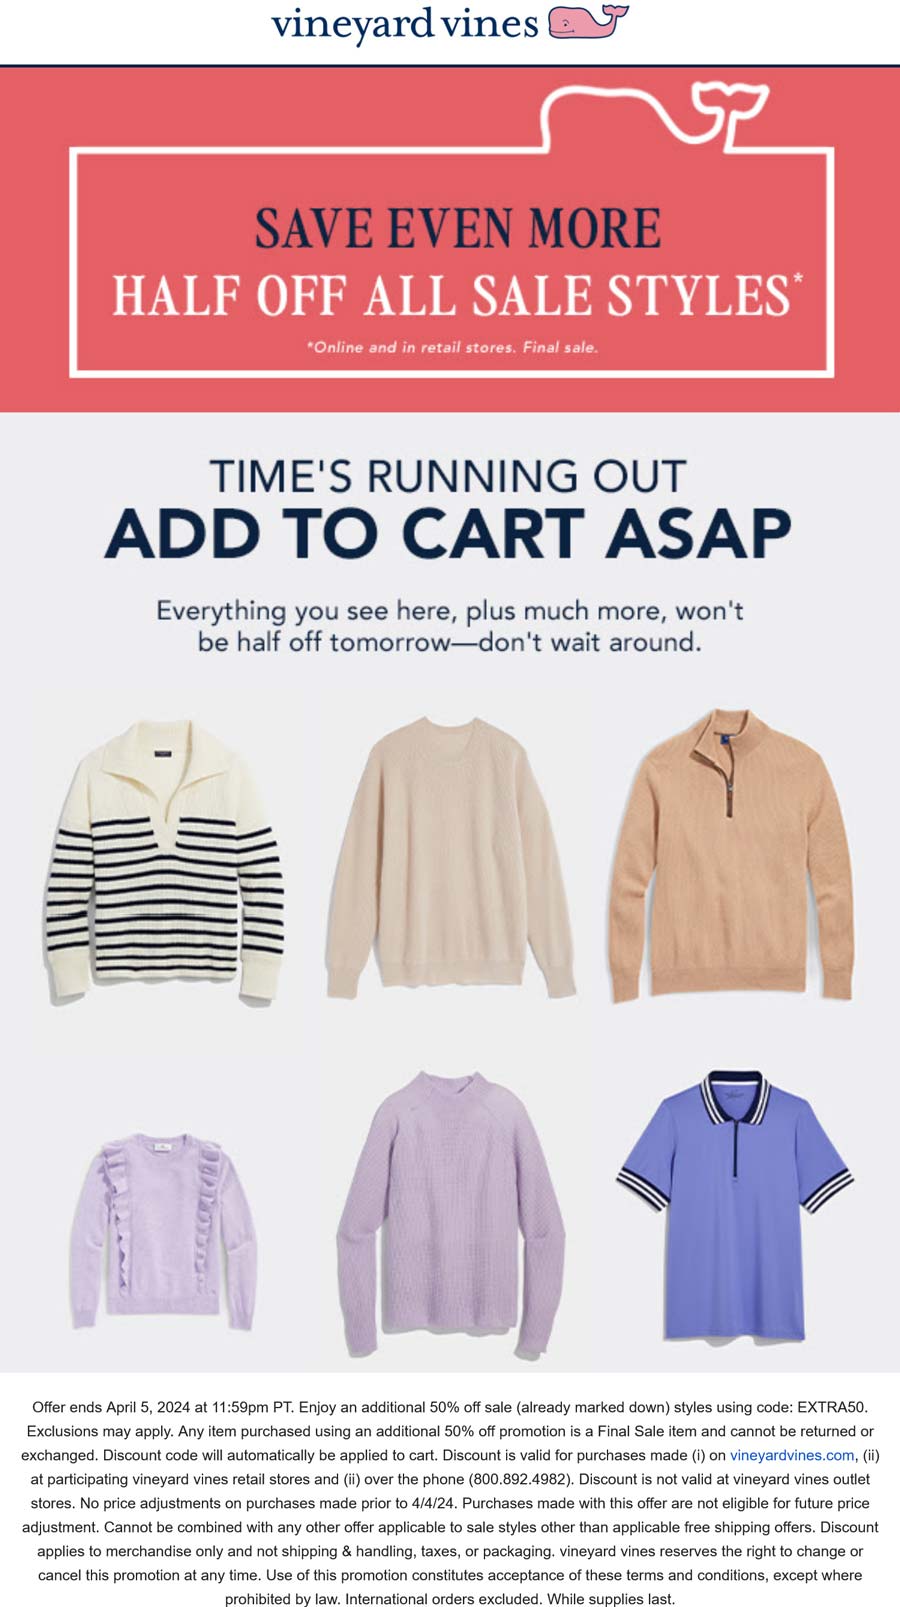 Vineyard Vines stores Coupon  Extra 50% off sale styles today at Vineyard Vines, ditto online #vineyardvines 